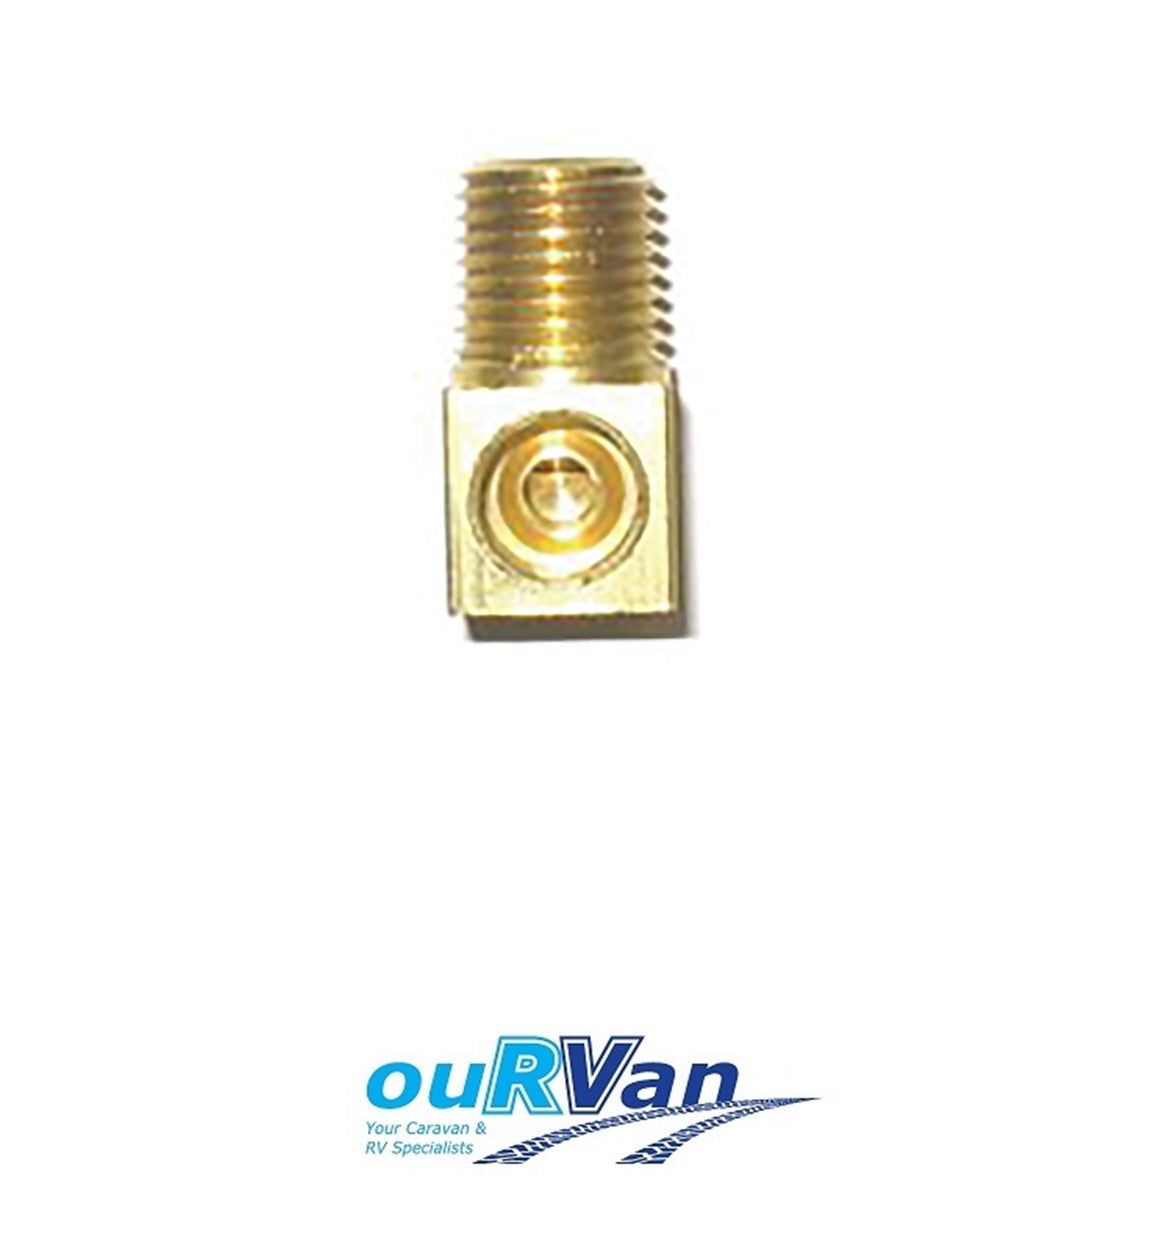 INV FLARE ELBOW MALE UNION ADAPTER FOR 2 STAGE REG